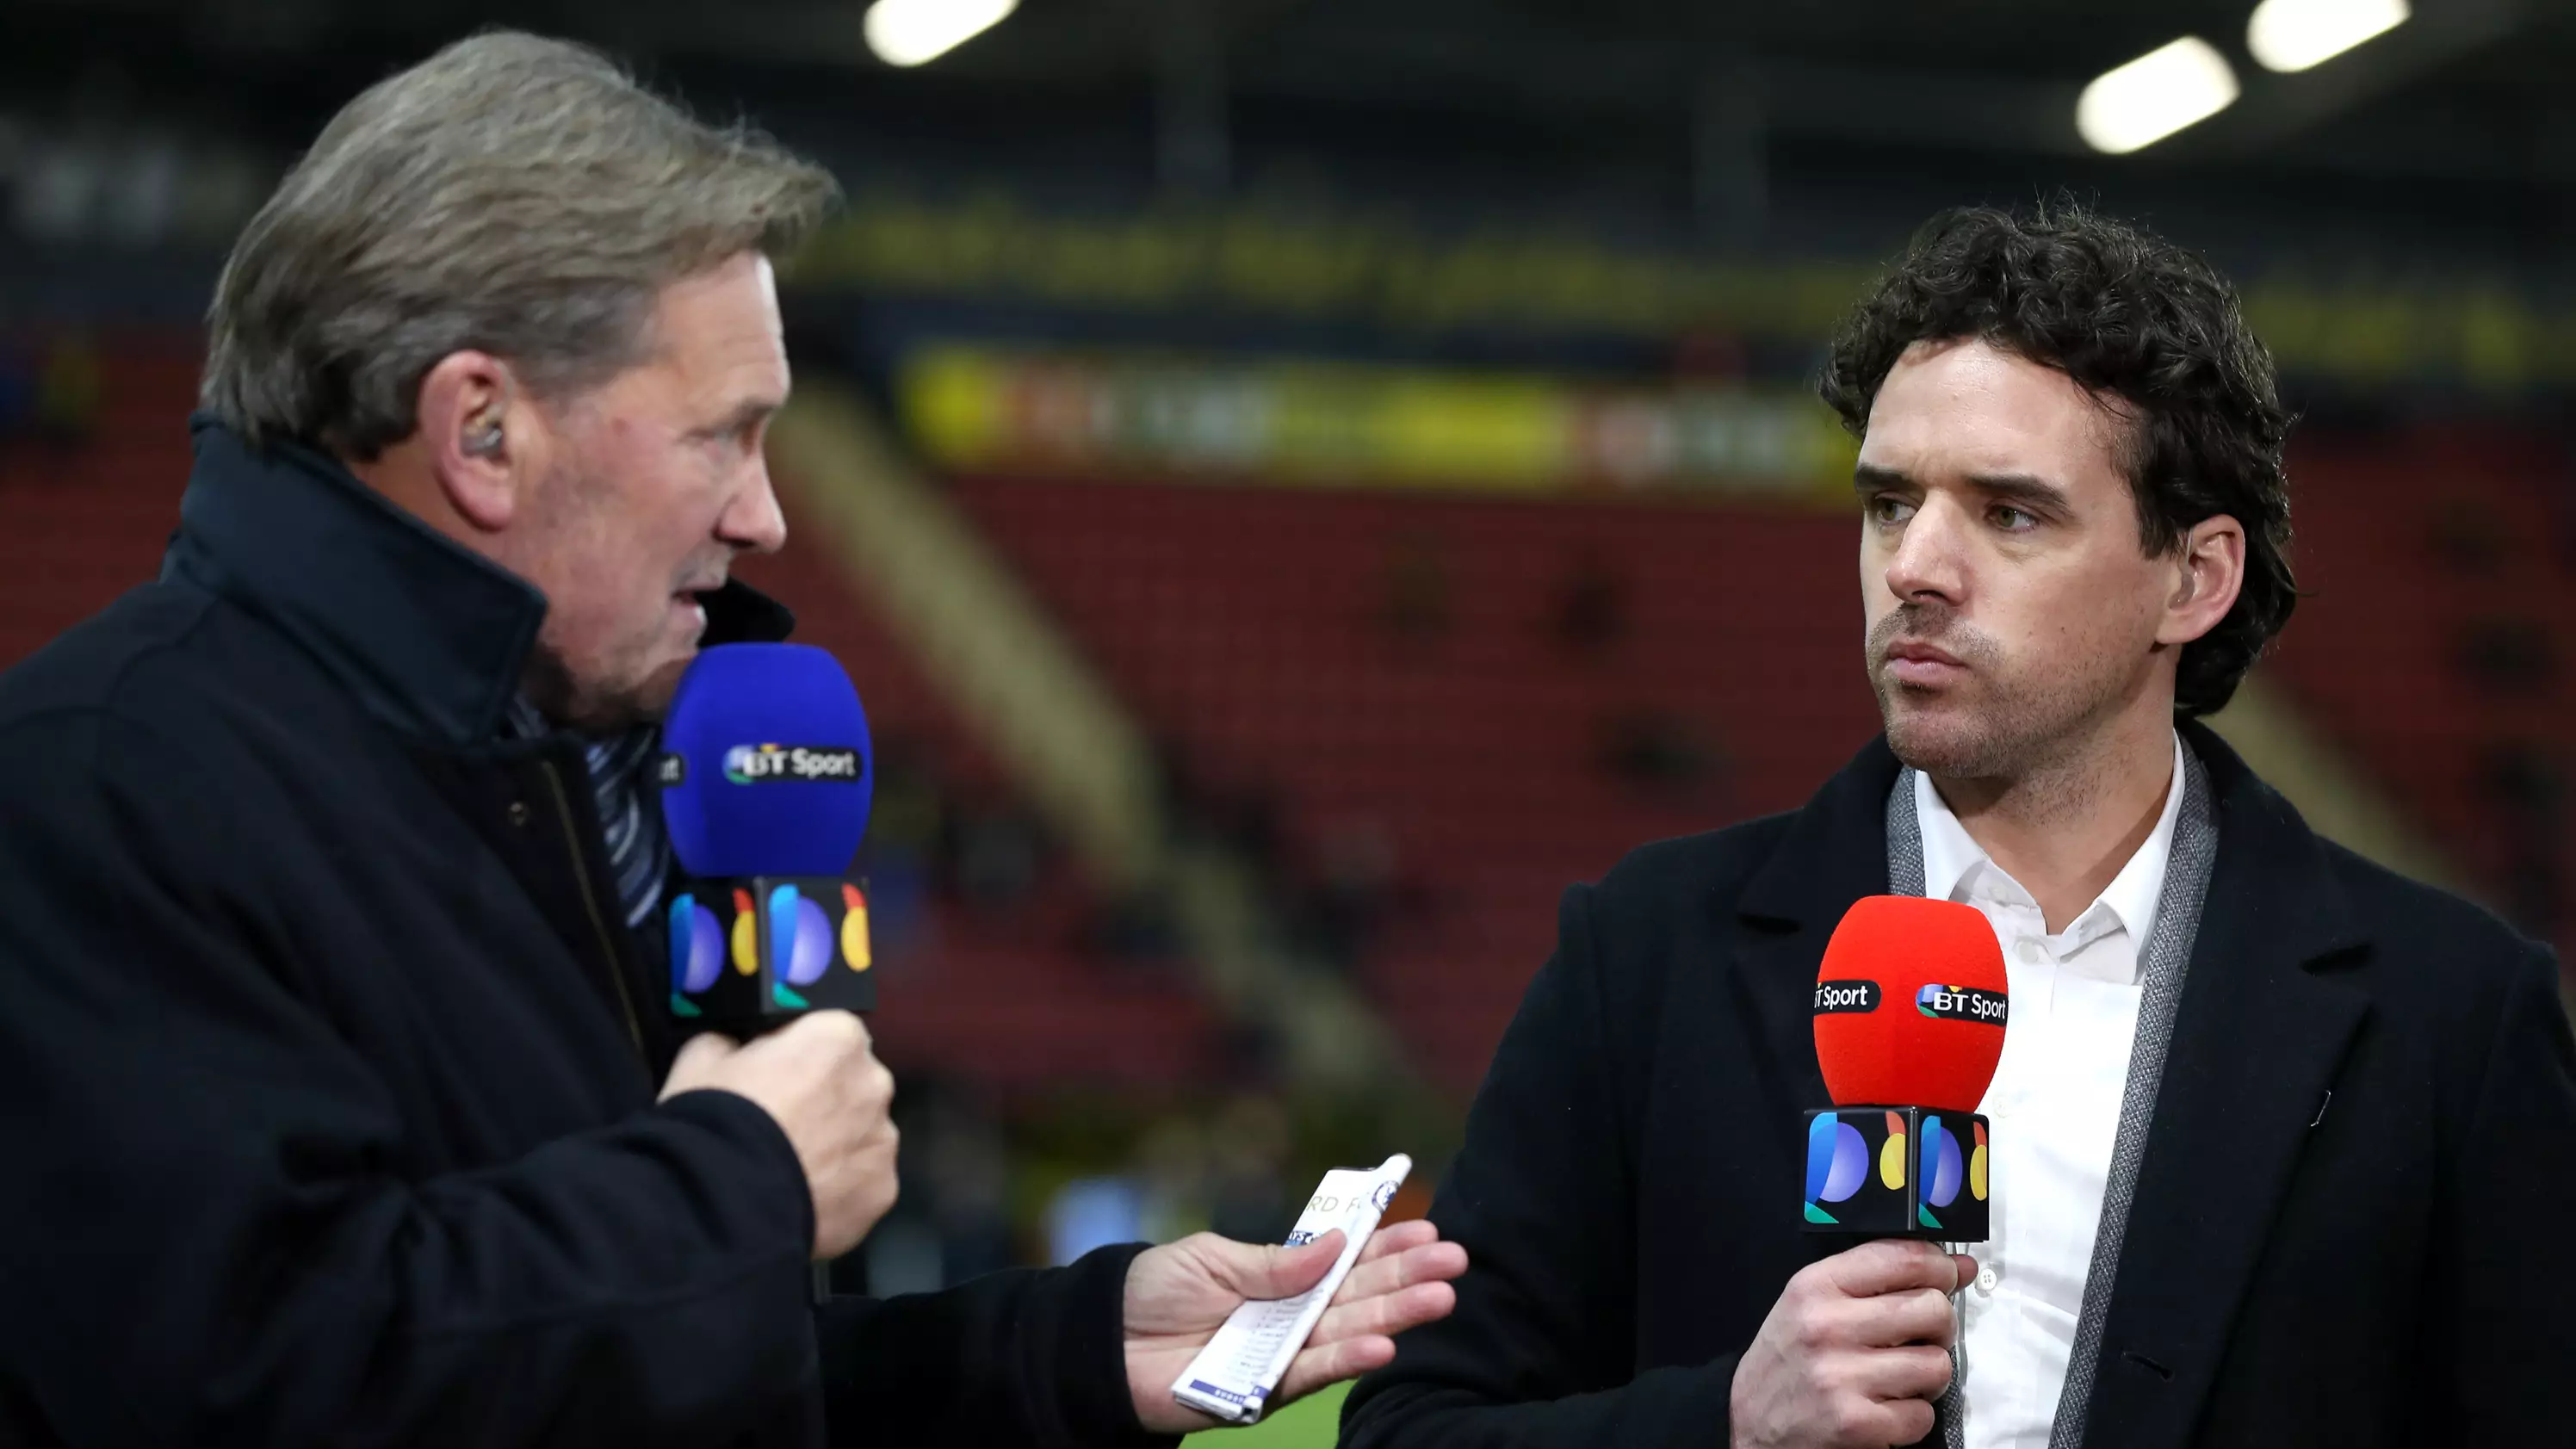 Owen Hargreaves Names Player Manchester United Should Sign Instead Of Antoinne Griezmann